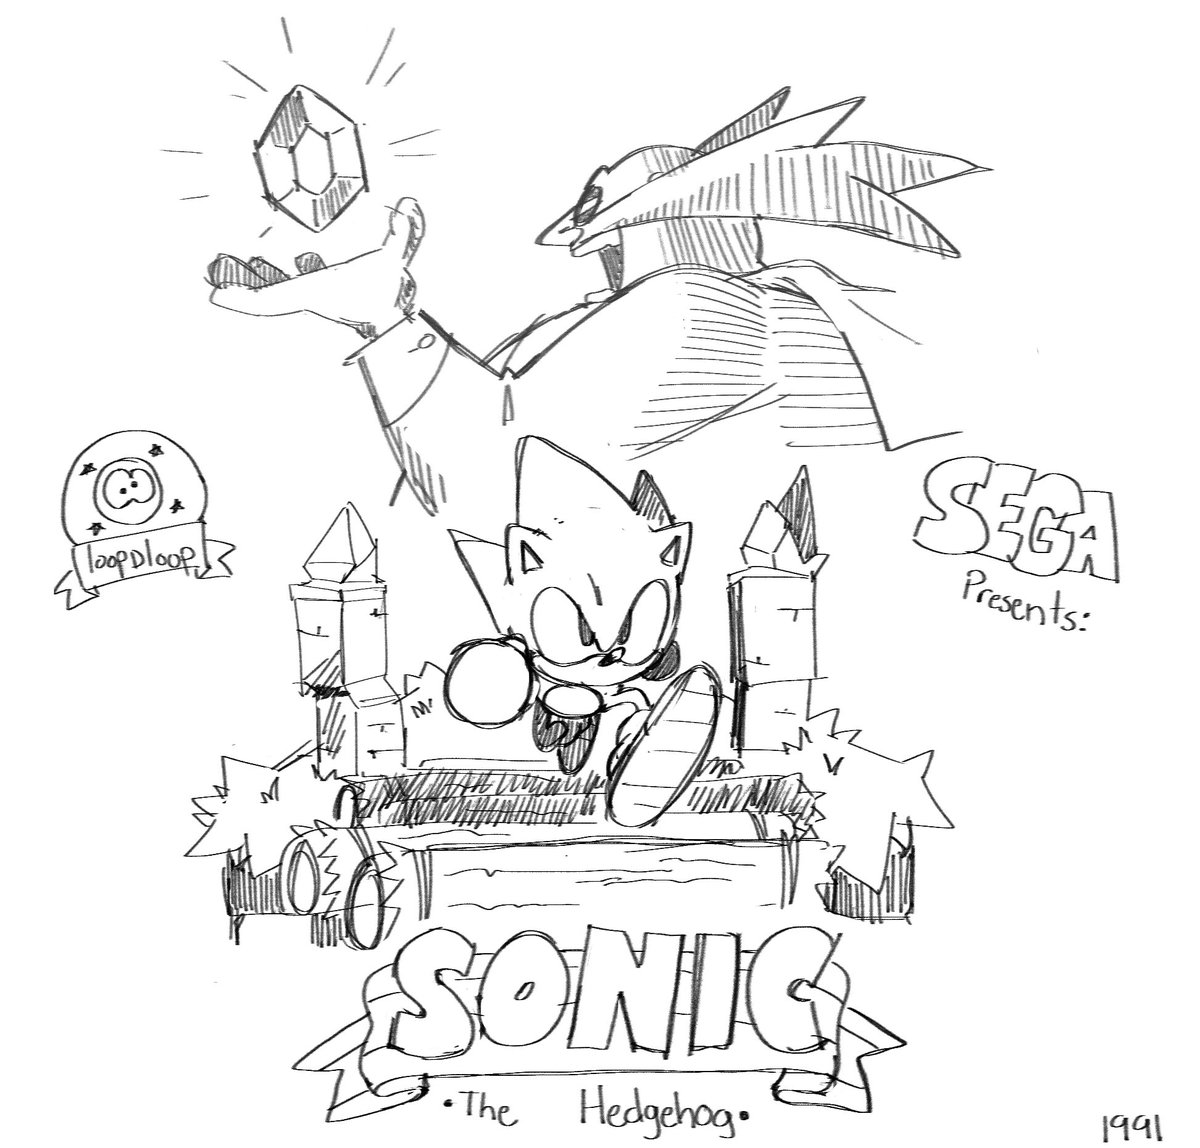 I never posted anything for finishing Sonic 1 for my every game run, so here’s an oldie!